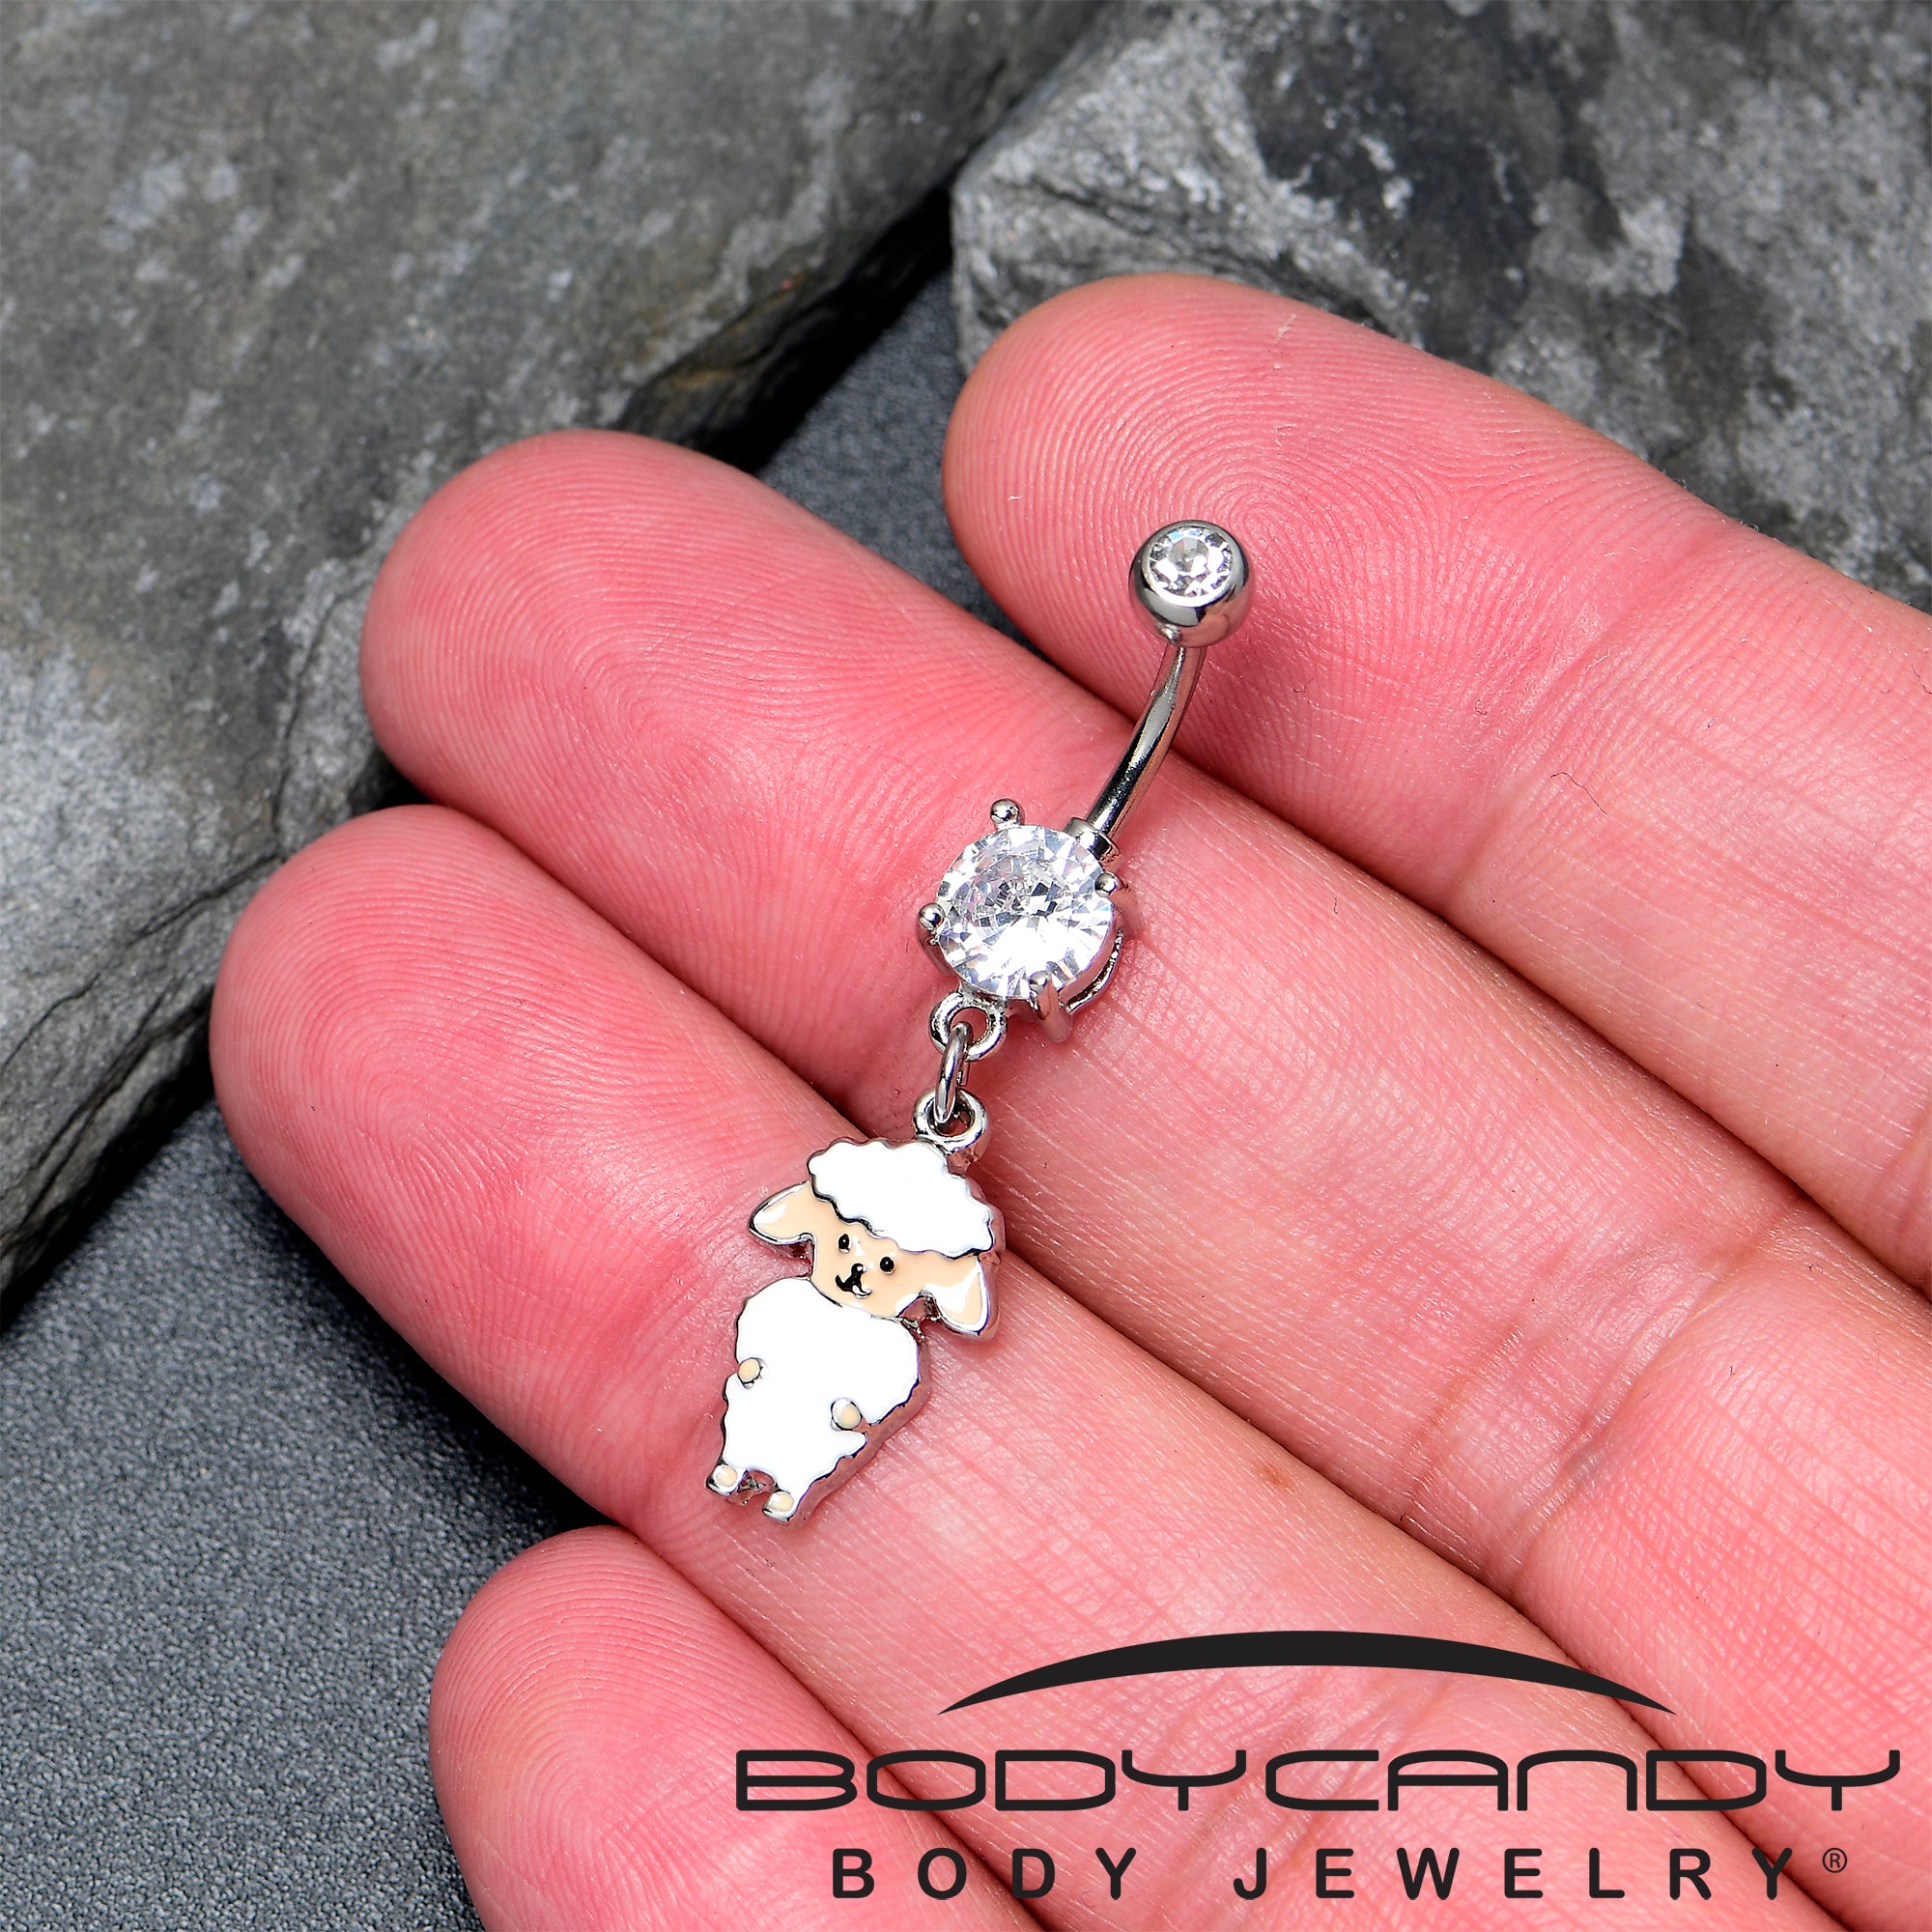 Clear Gem Sweetheart Sheep Dangle Belly Ring